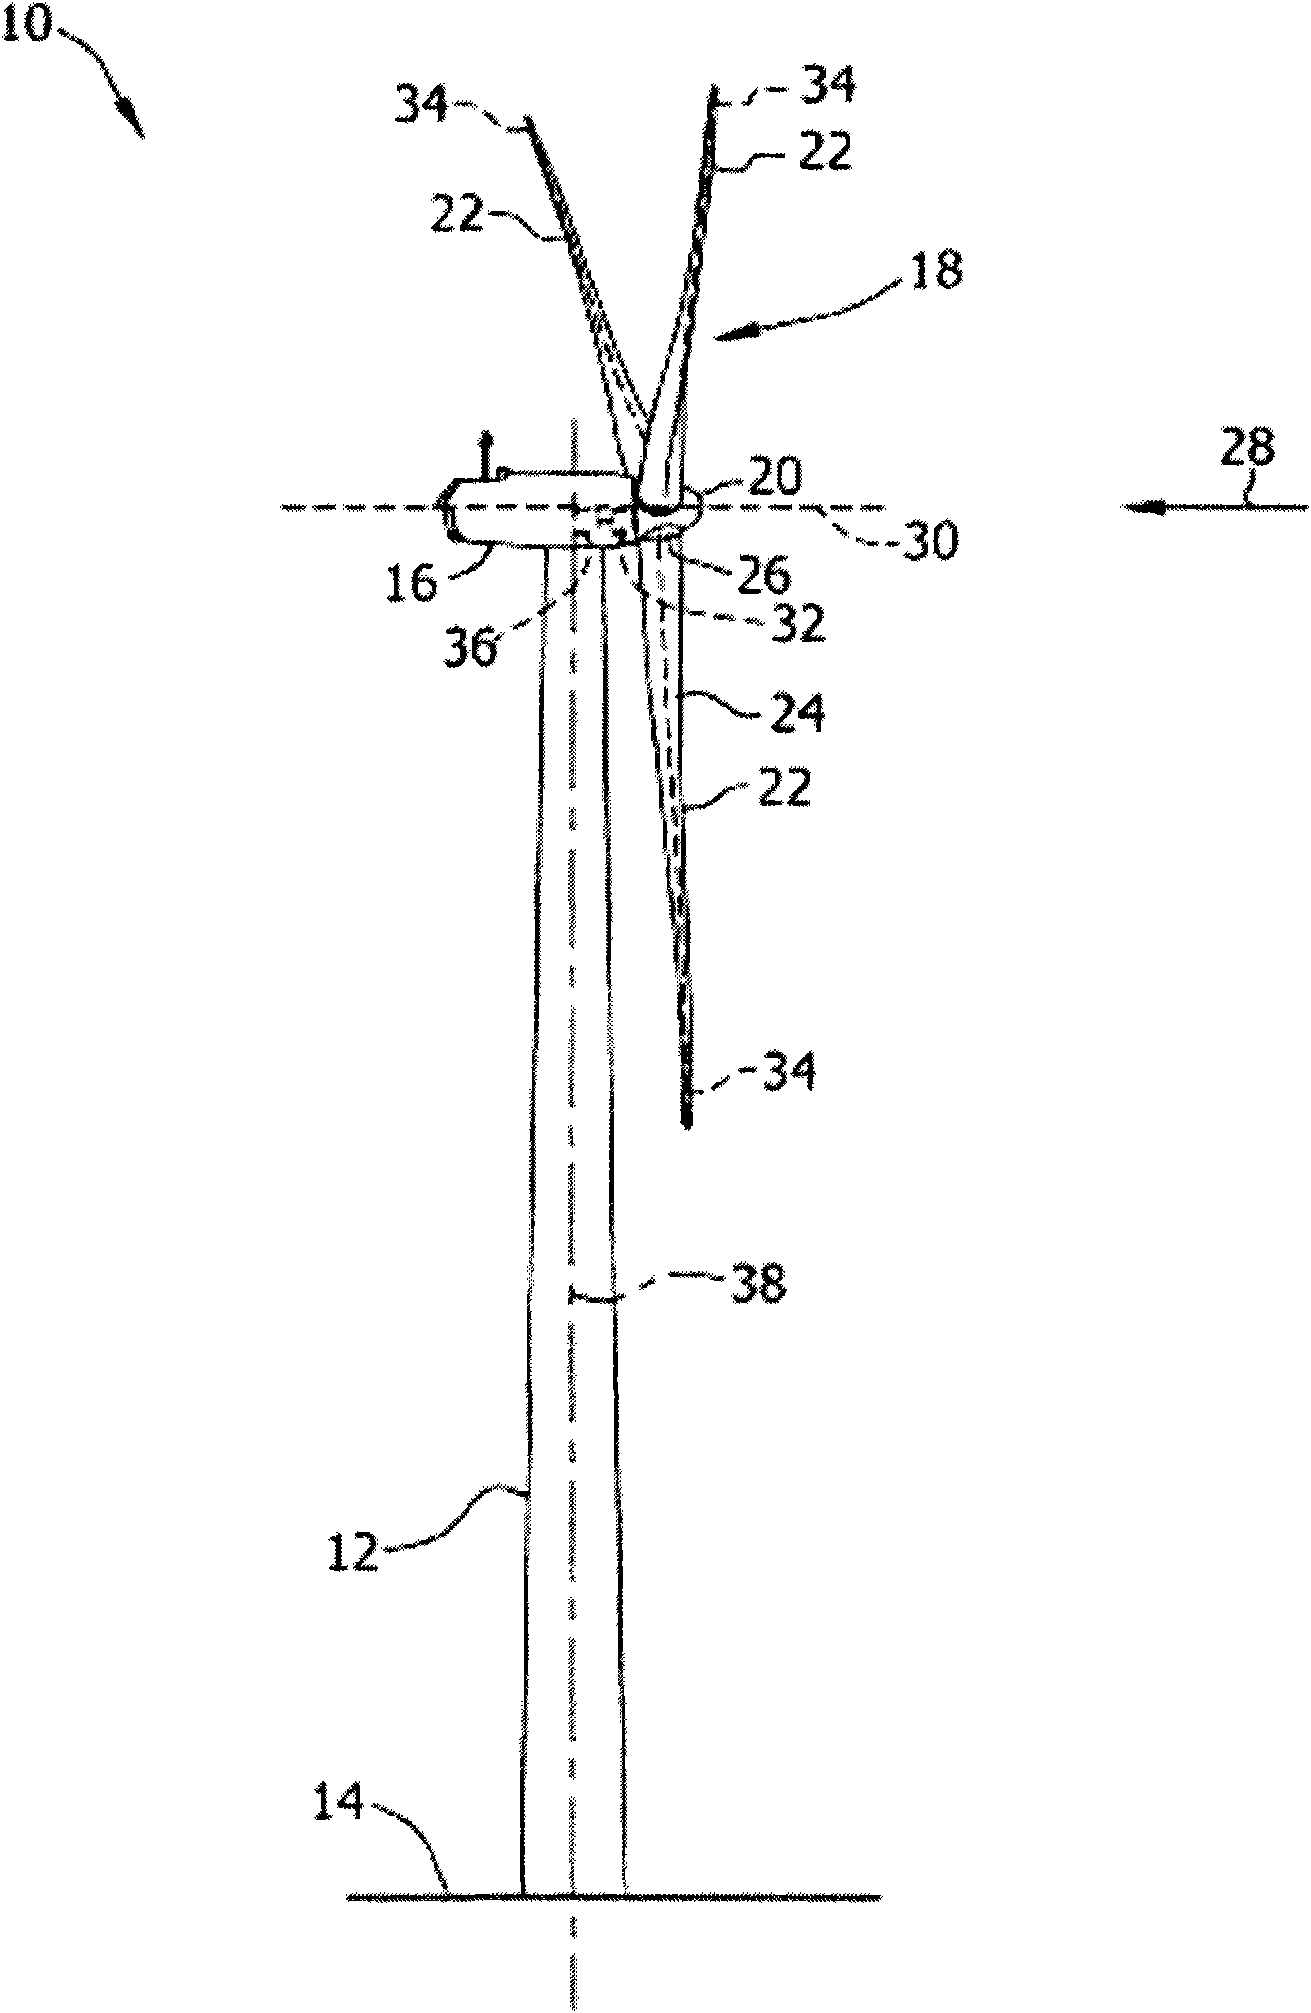 System and method for monitoring and controlling wind turbine blade deflection